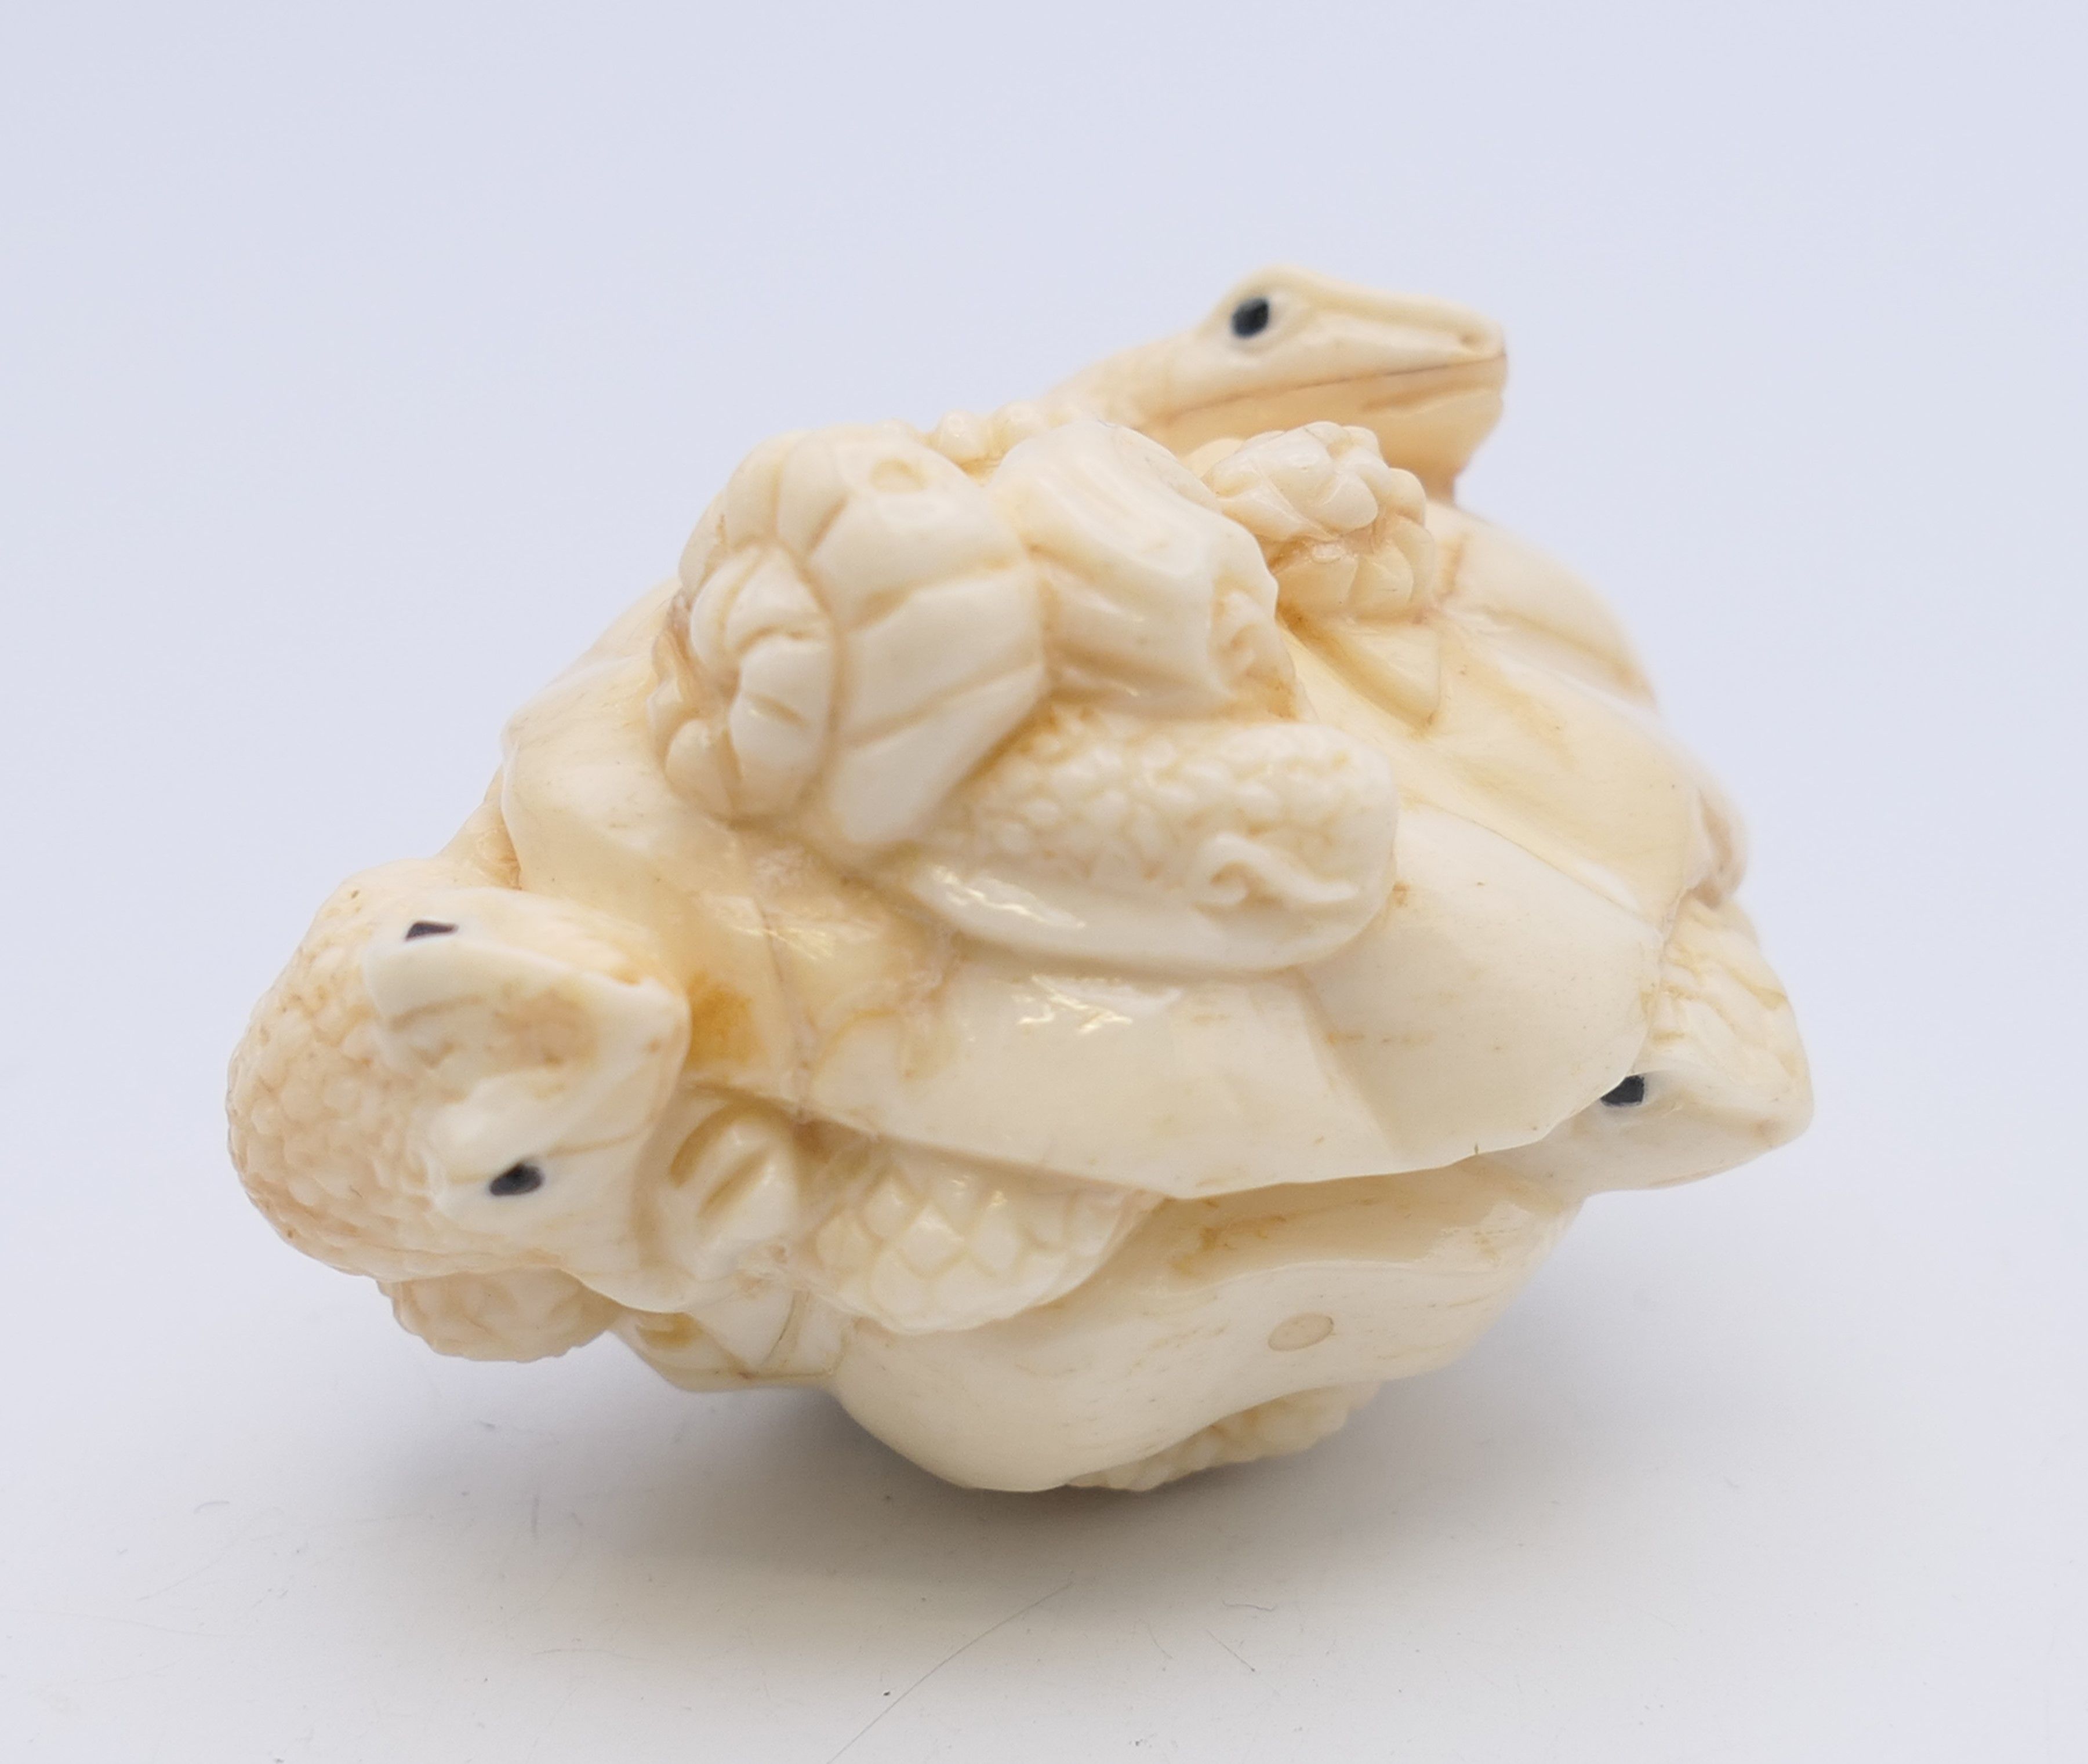 A bone carving of frogs. 5 cm long.